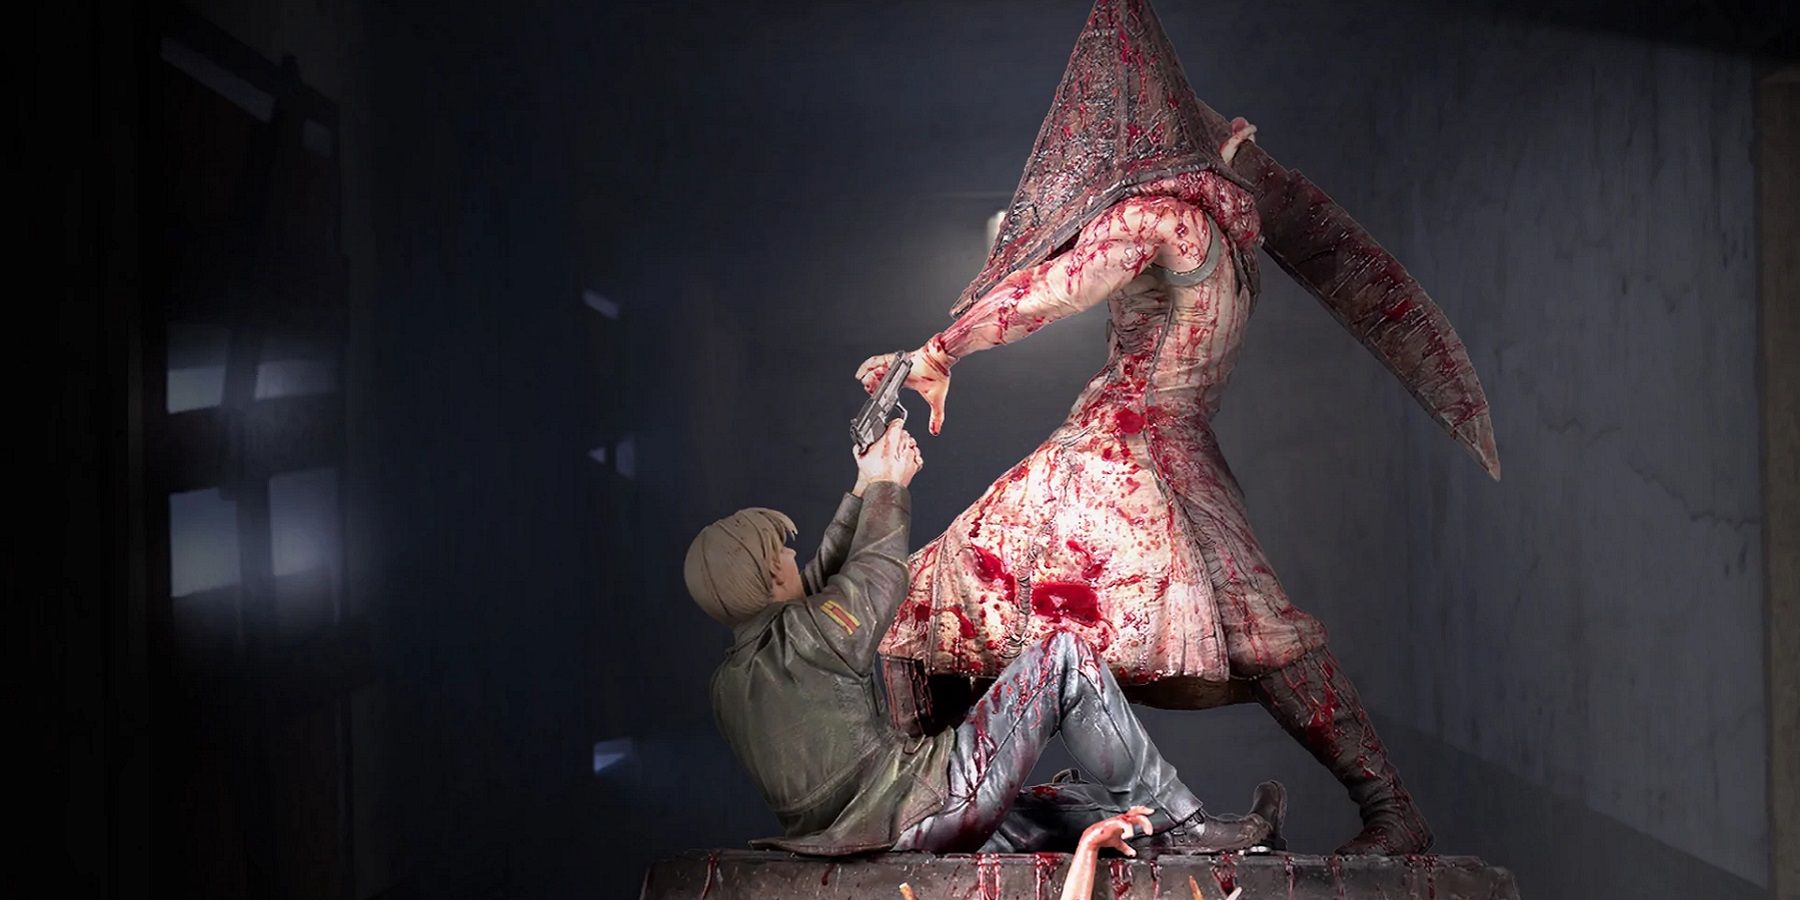 Image of a statue from Silent Hill 2 showing James Sunderland fighting Pyramid Head.